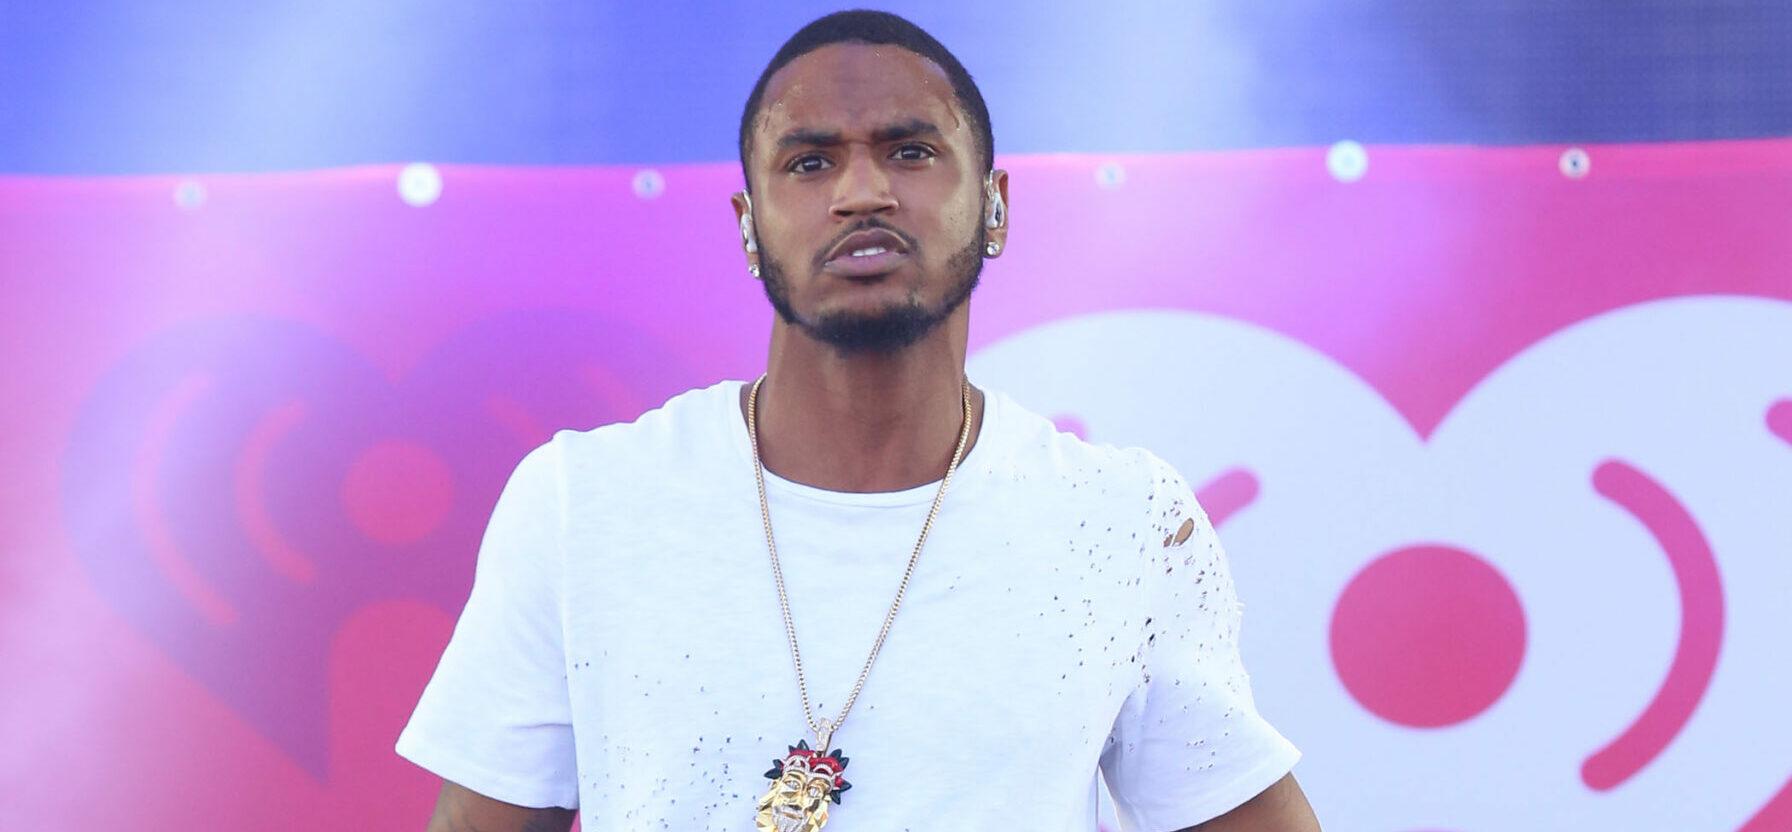 Trey Songz Accused Of Violent Sexual Assault, Victim Suffered 'Severe Tearing'